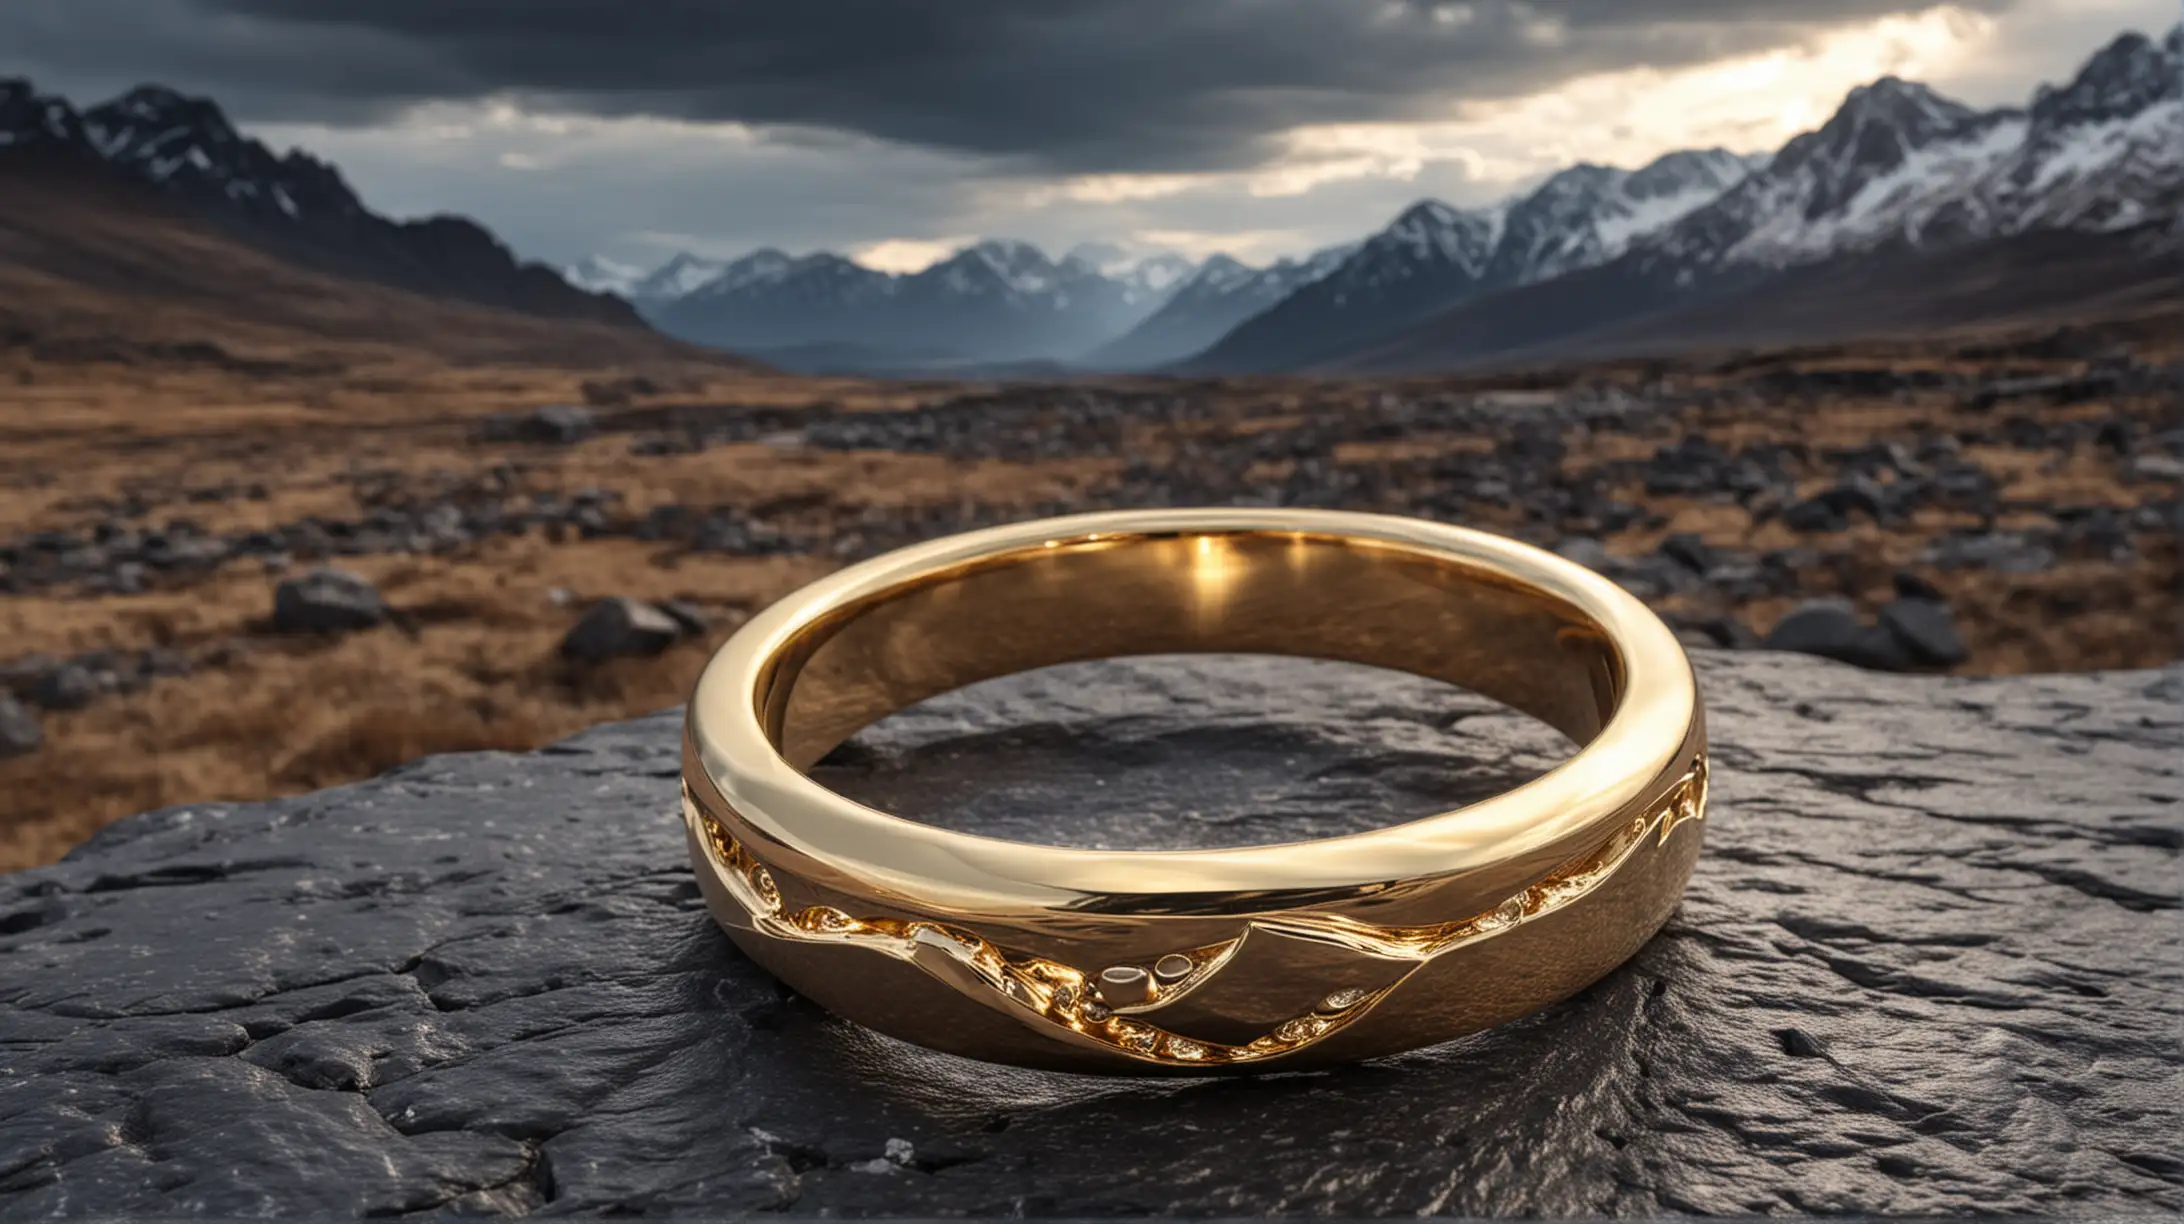 Create a picture of a golden ring with a polished smooth surface lying glowing on a stone. In the background you can see rugged mountains against a dark cloudy sky.